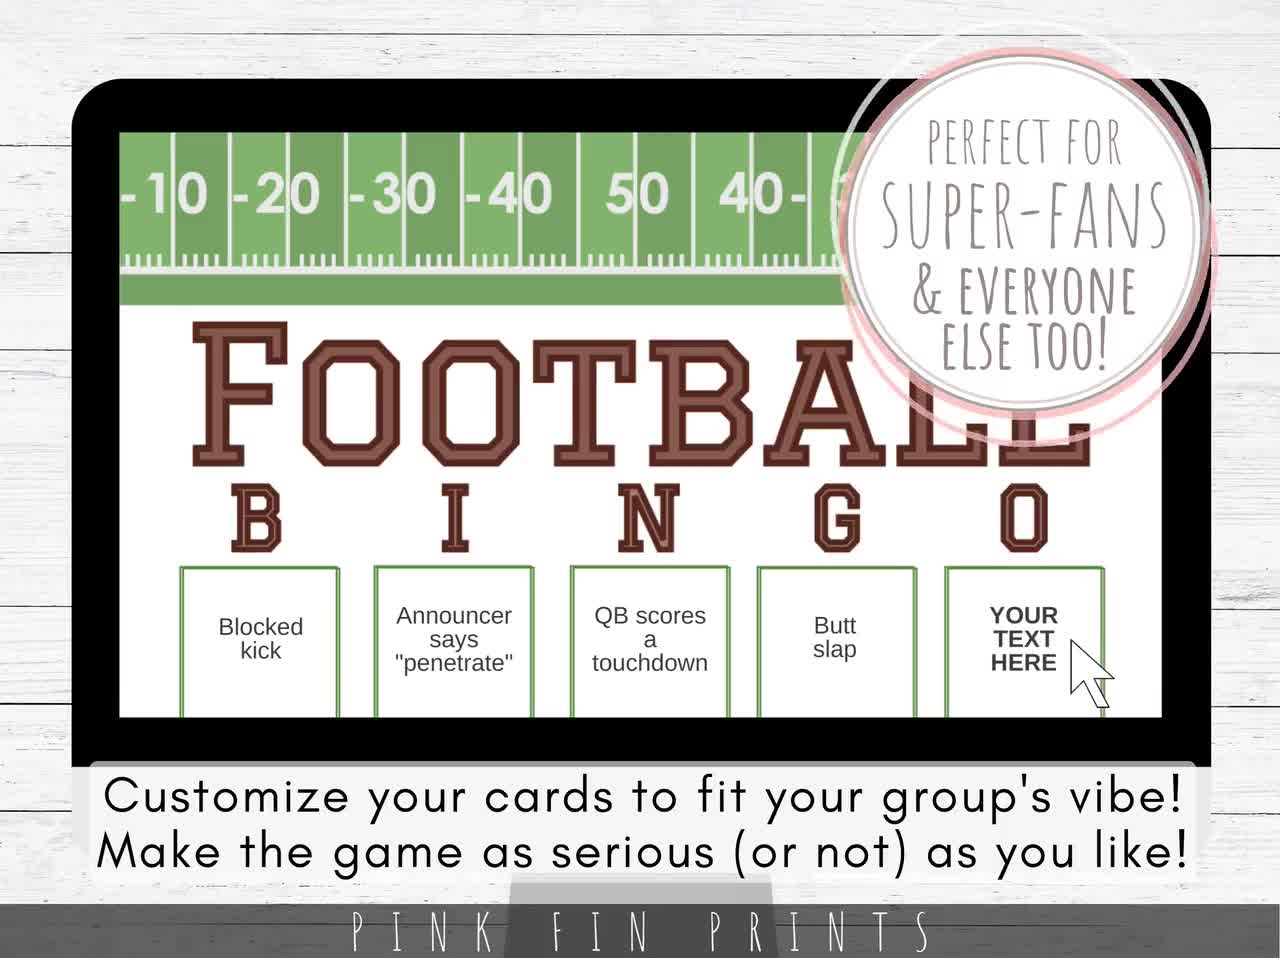 Tonight! Cozy up with us for some football bingo in the taproom at